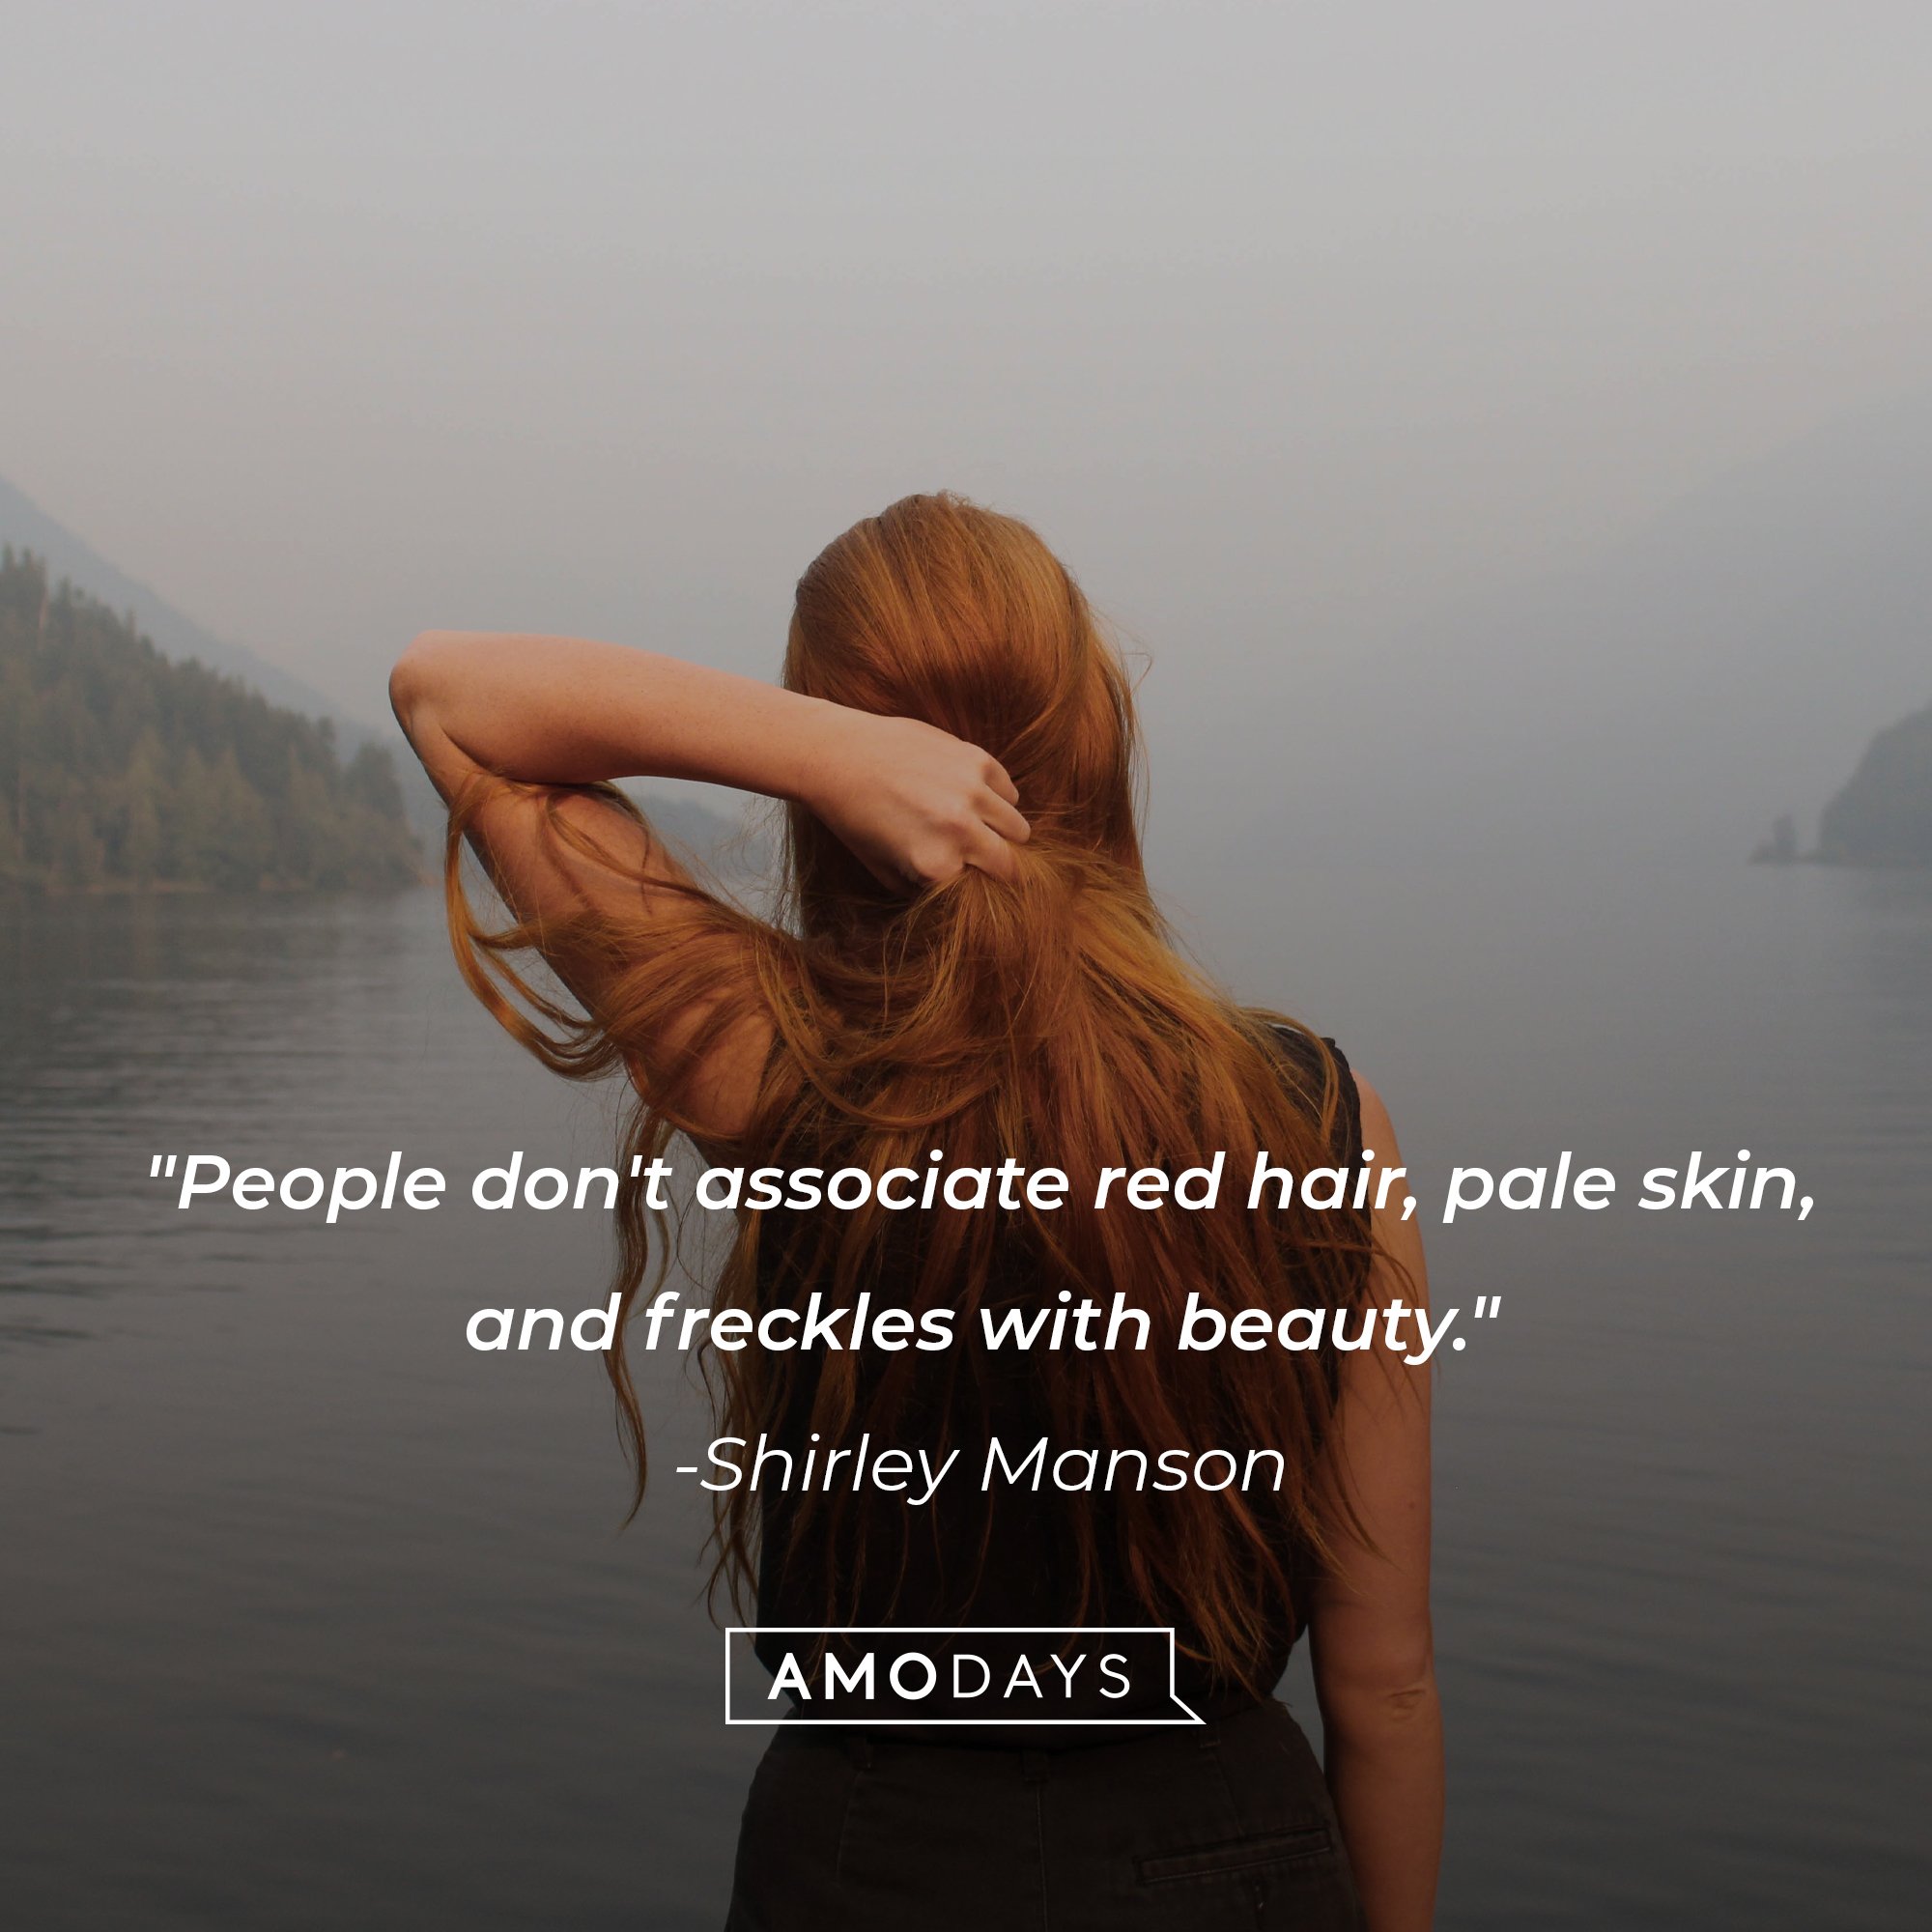 Shirley Manson’s quote: "People don't associate red hair, pale skin, and freckles with beauty." | Image: AmoDays